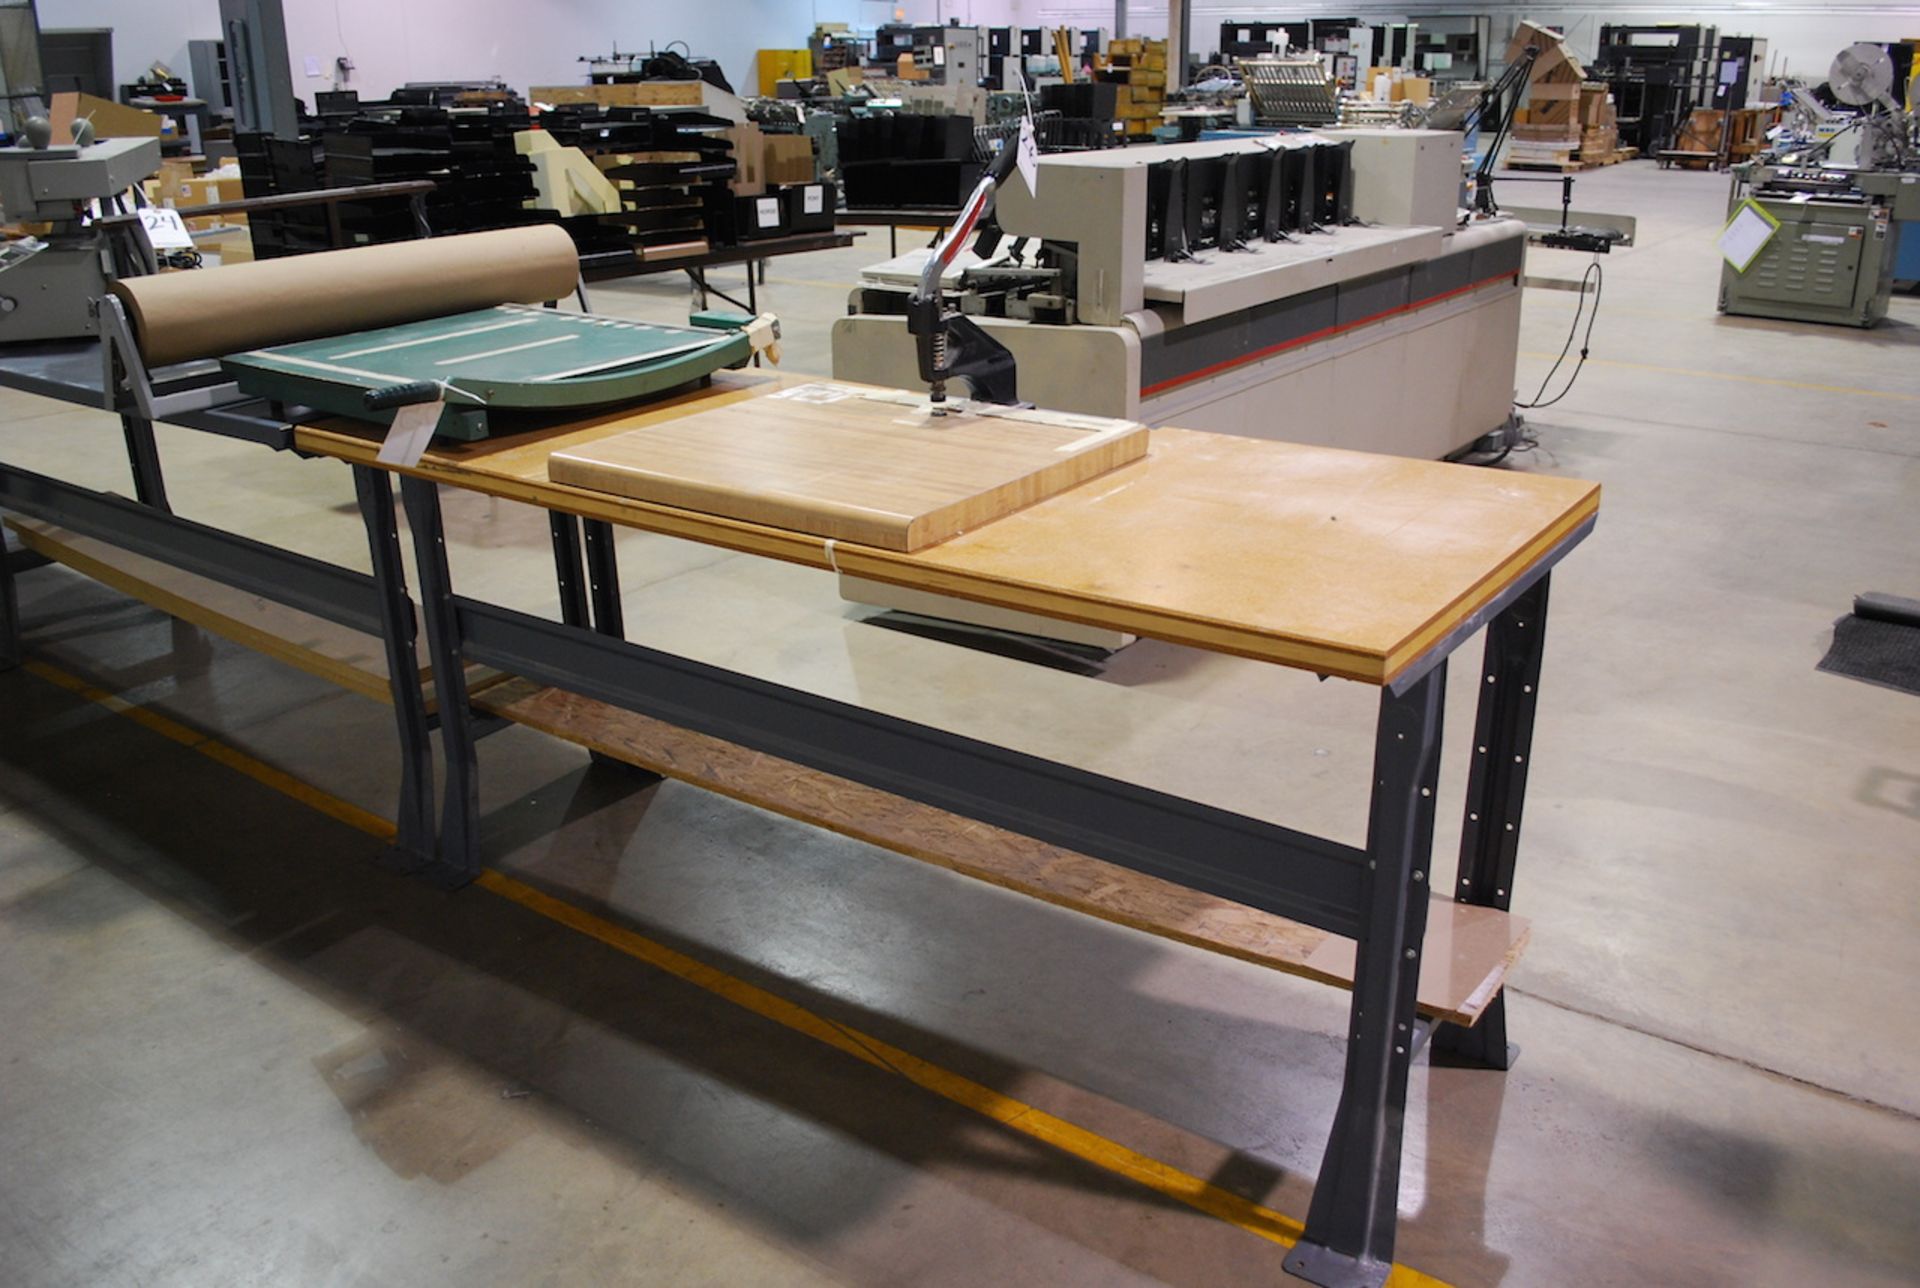 FASNAP MODEL FD MANUAL GROMMET PRESS PUNCH; W/72" x 30" Laminated Top Work Bench - Image 2 of 2